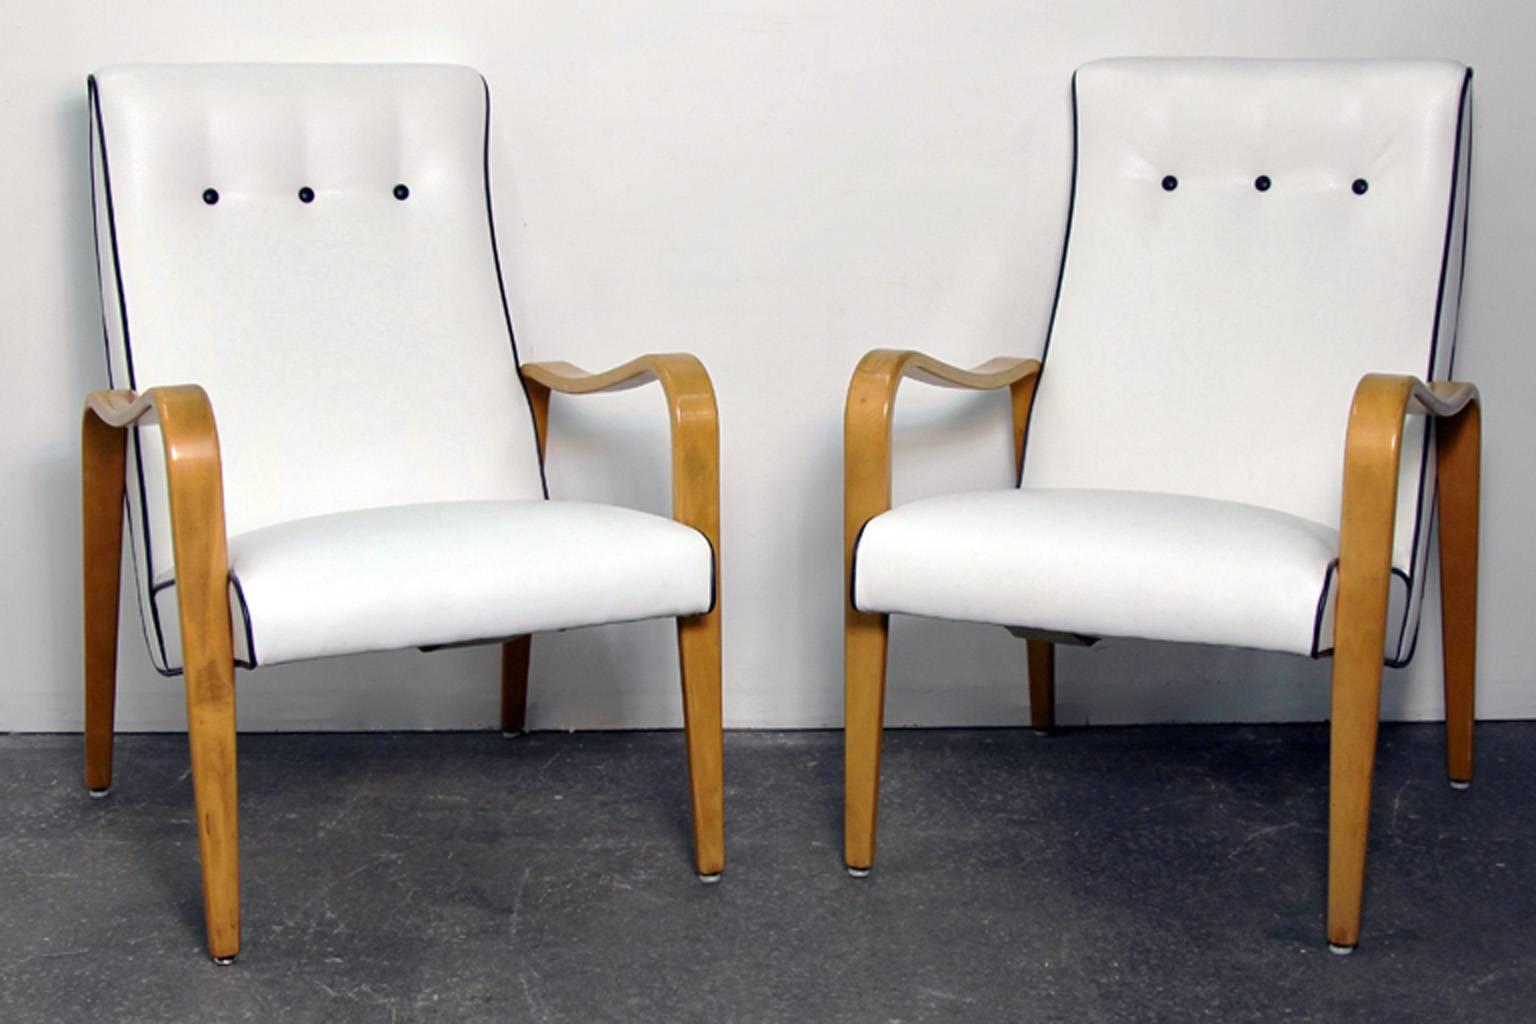 Beautiful pair of Thonet bentwood armchairs. Newly upholstered in white with contrast leather piping. Original tags, excellent mid-century style.